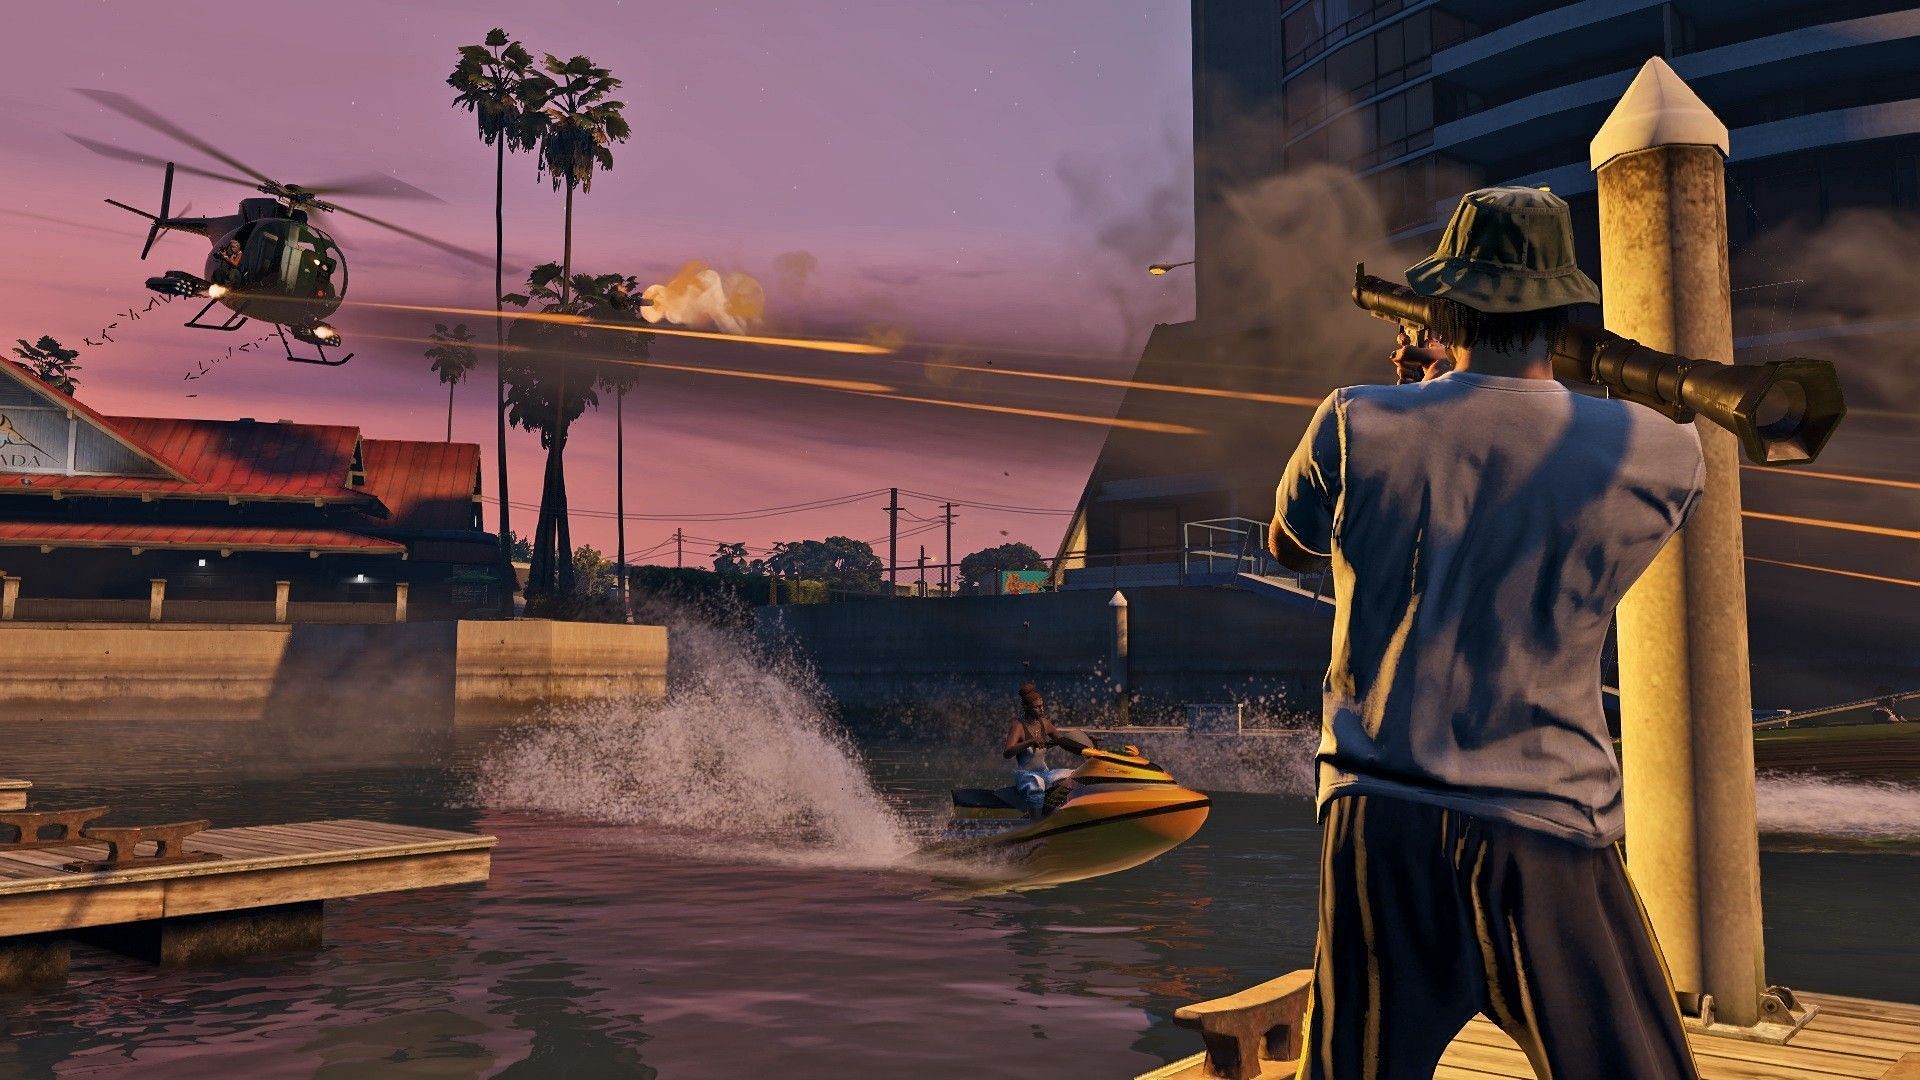 GTA 5 and Gran Turismo 7 Are Dominating the PS5 Most Downloaded